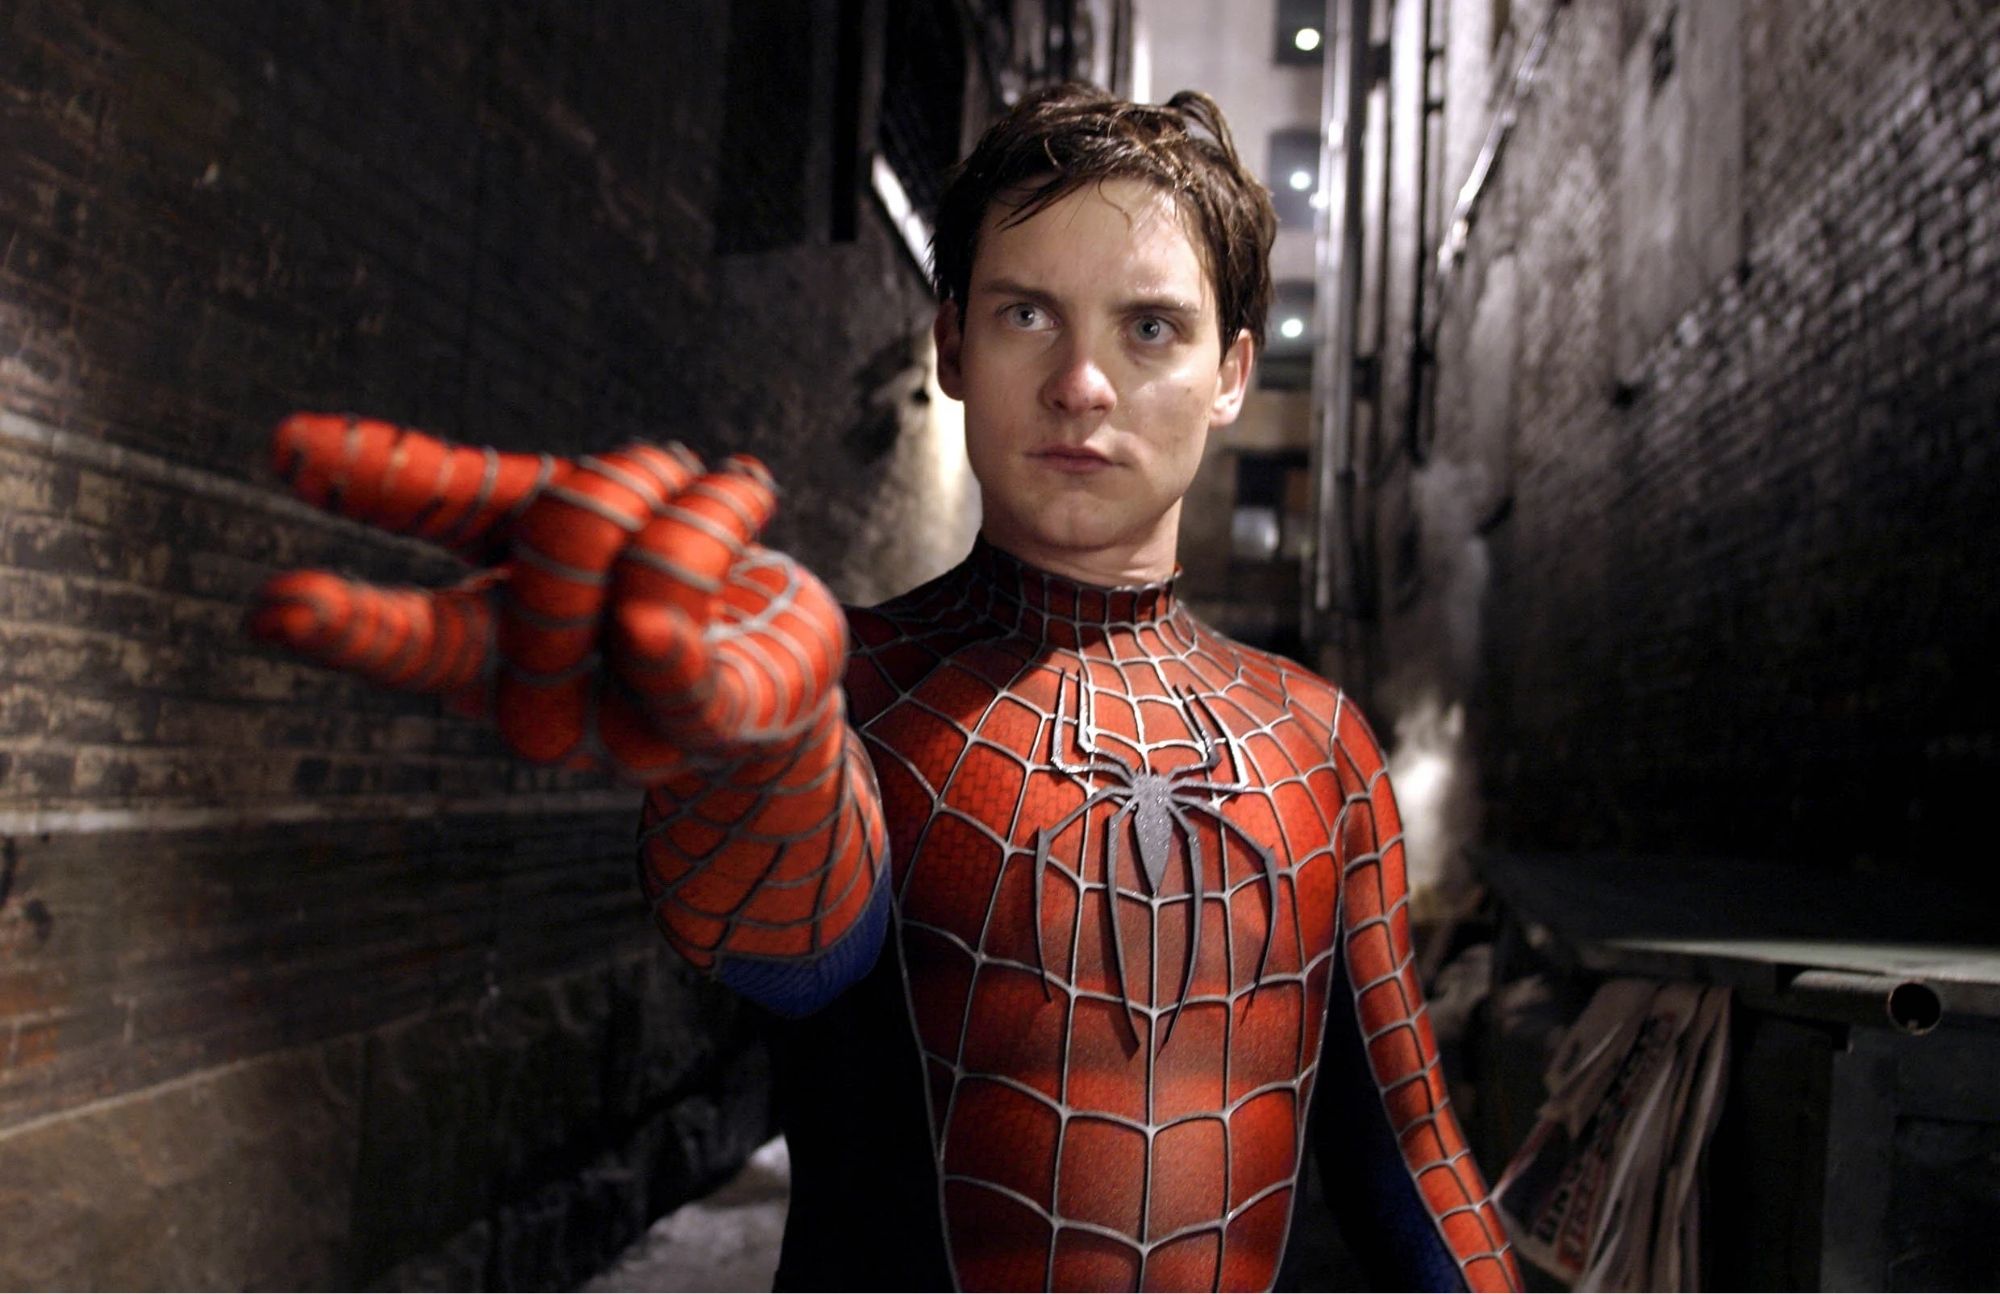 Tobey Maguire, one of the actors who portrayed Spider-Man, is preparing to shoot his web in the picture